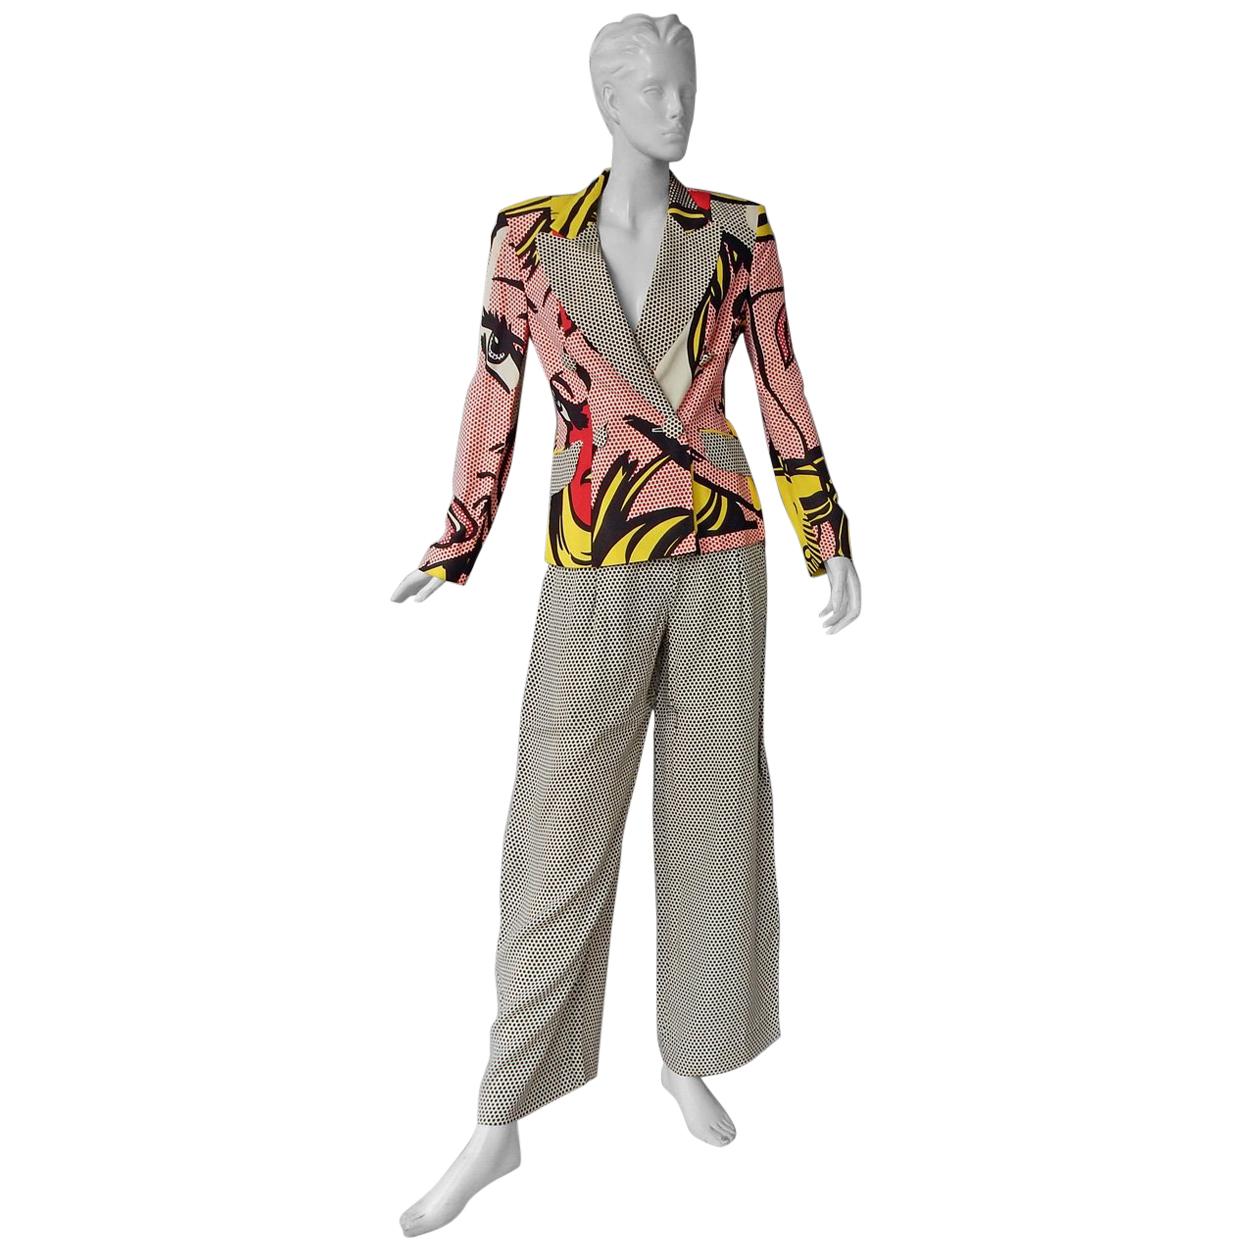  Moschino Rare Roy Lichtenstein Jacket and Pants Suit S/S 1991